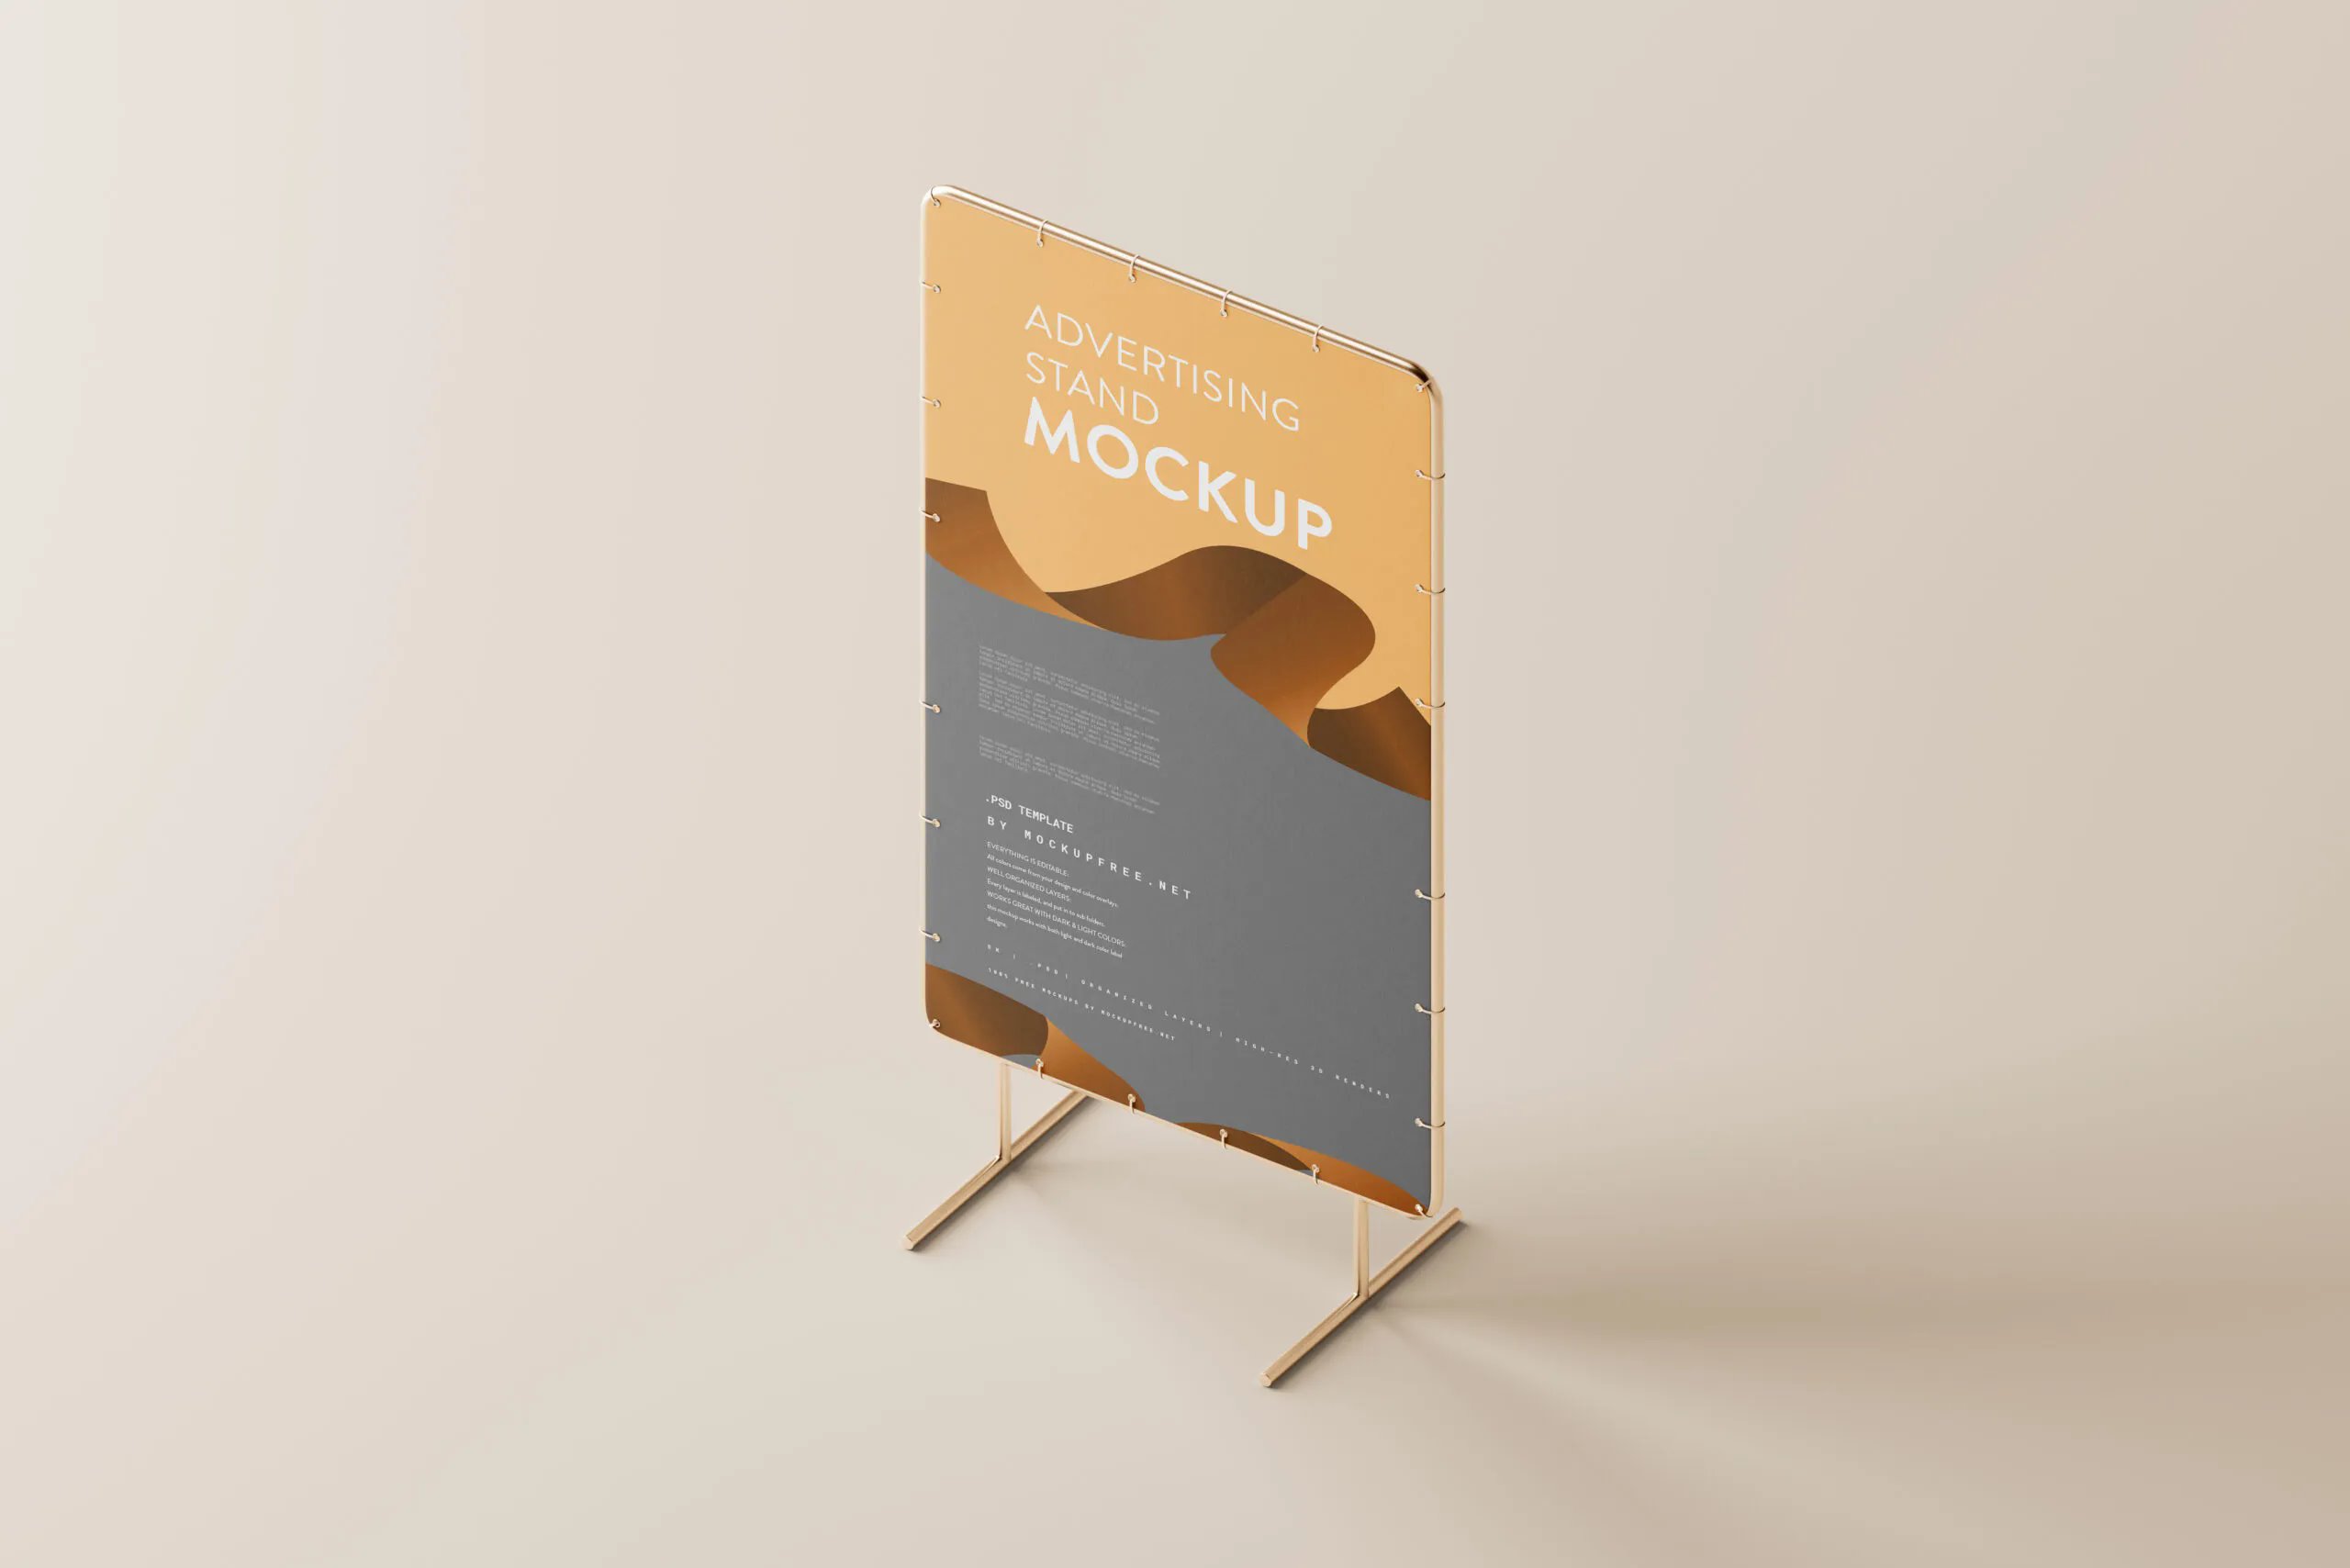 5 Shots of Advertising Stand Mockup FREE PSD